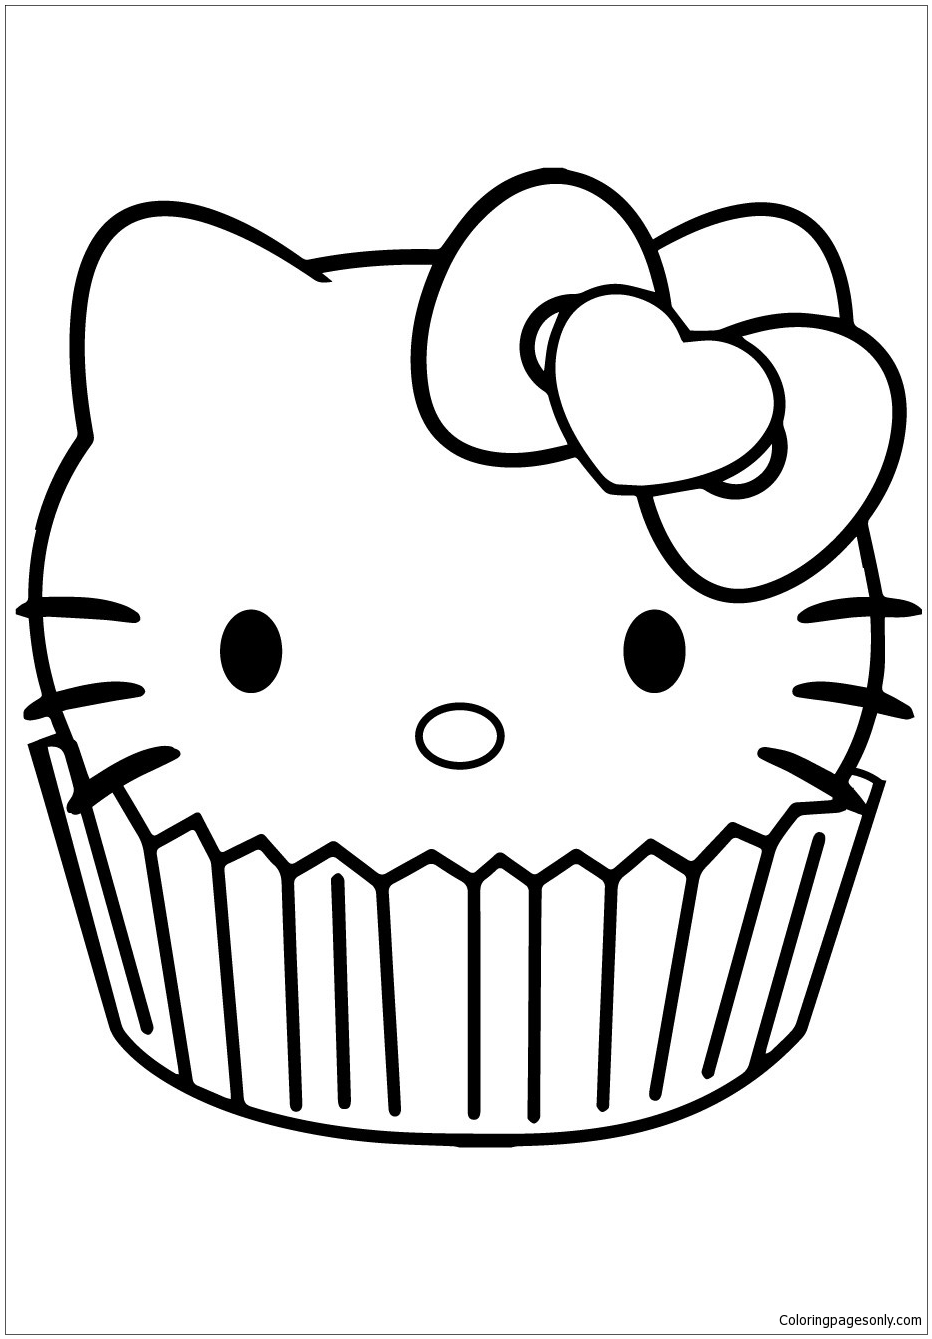 Hello Kitty Cupcake Coloring Page - Free Coloring Pages Online